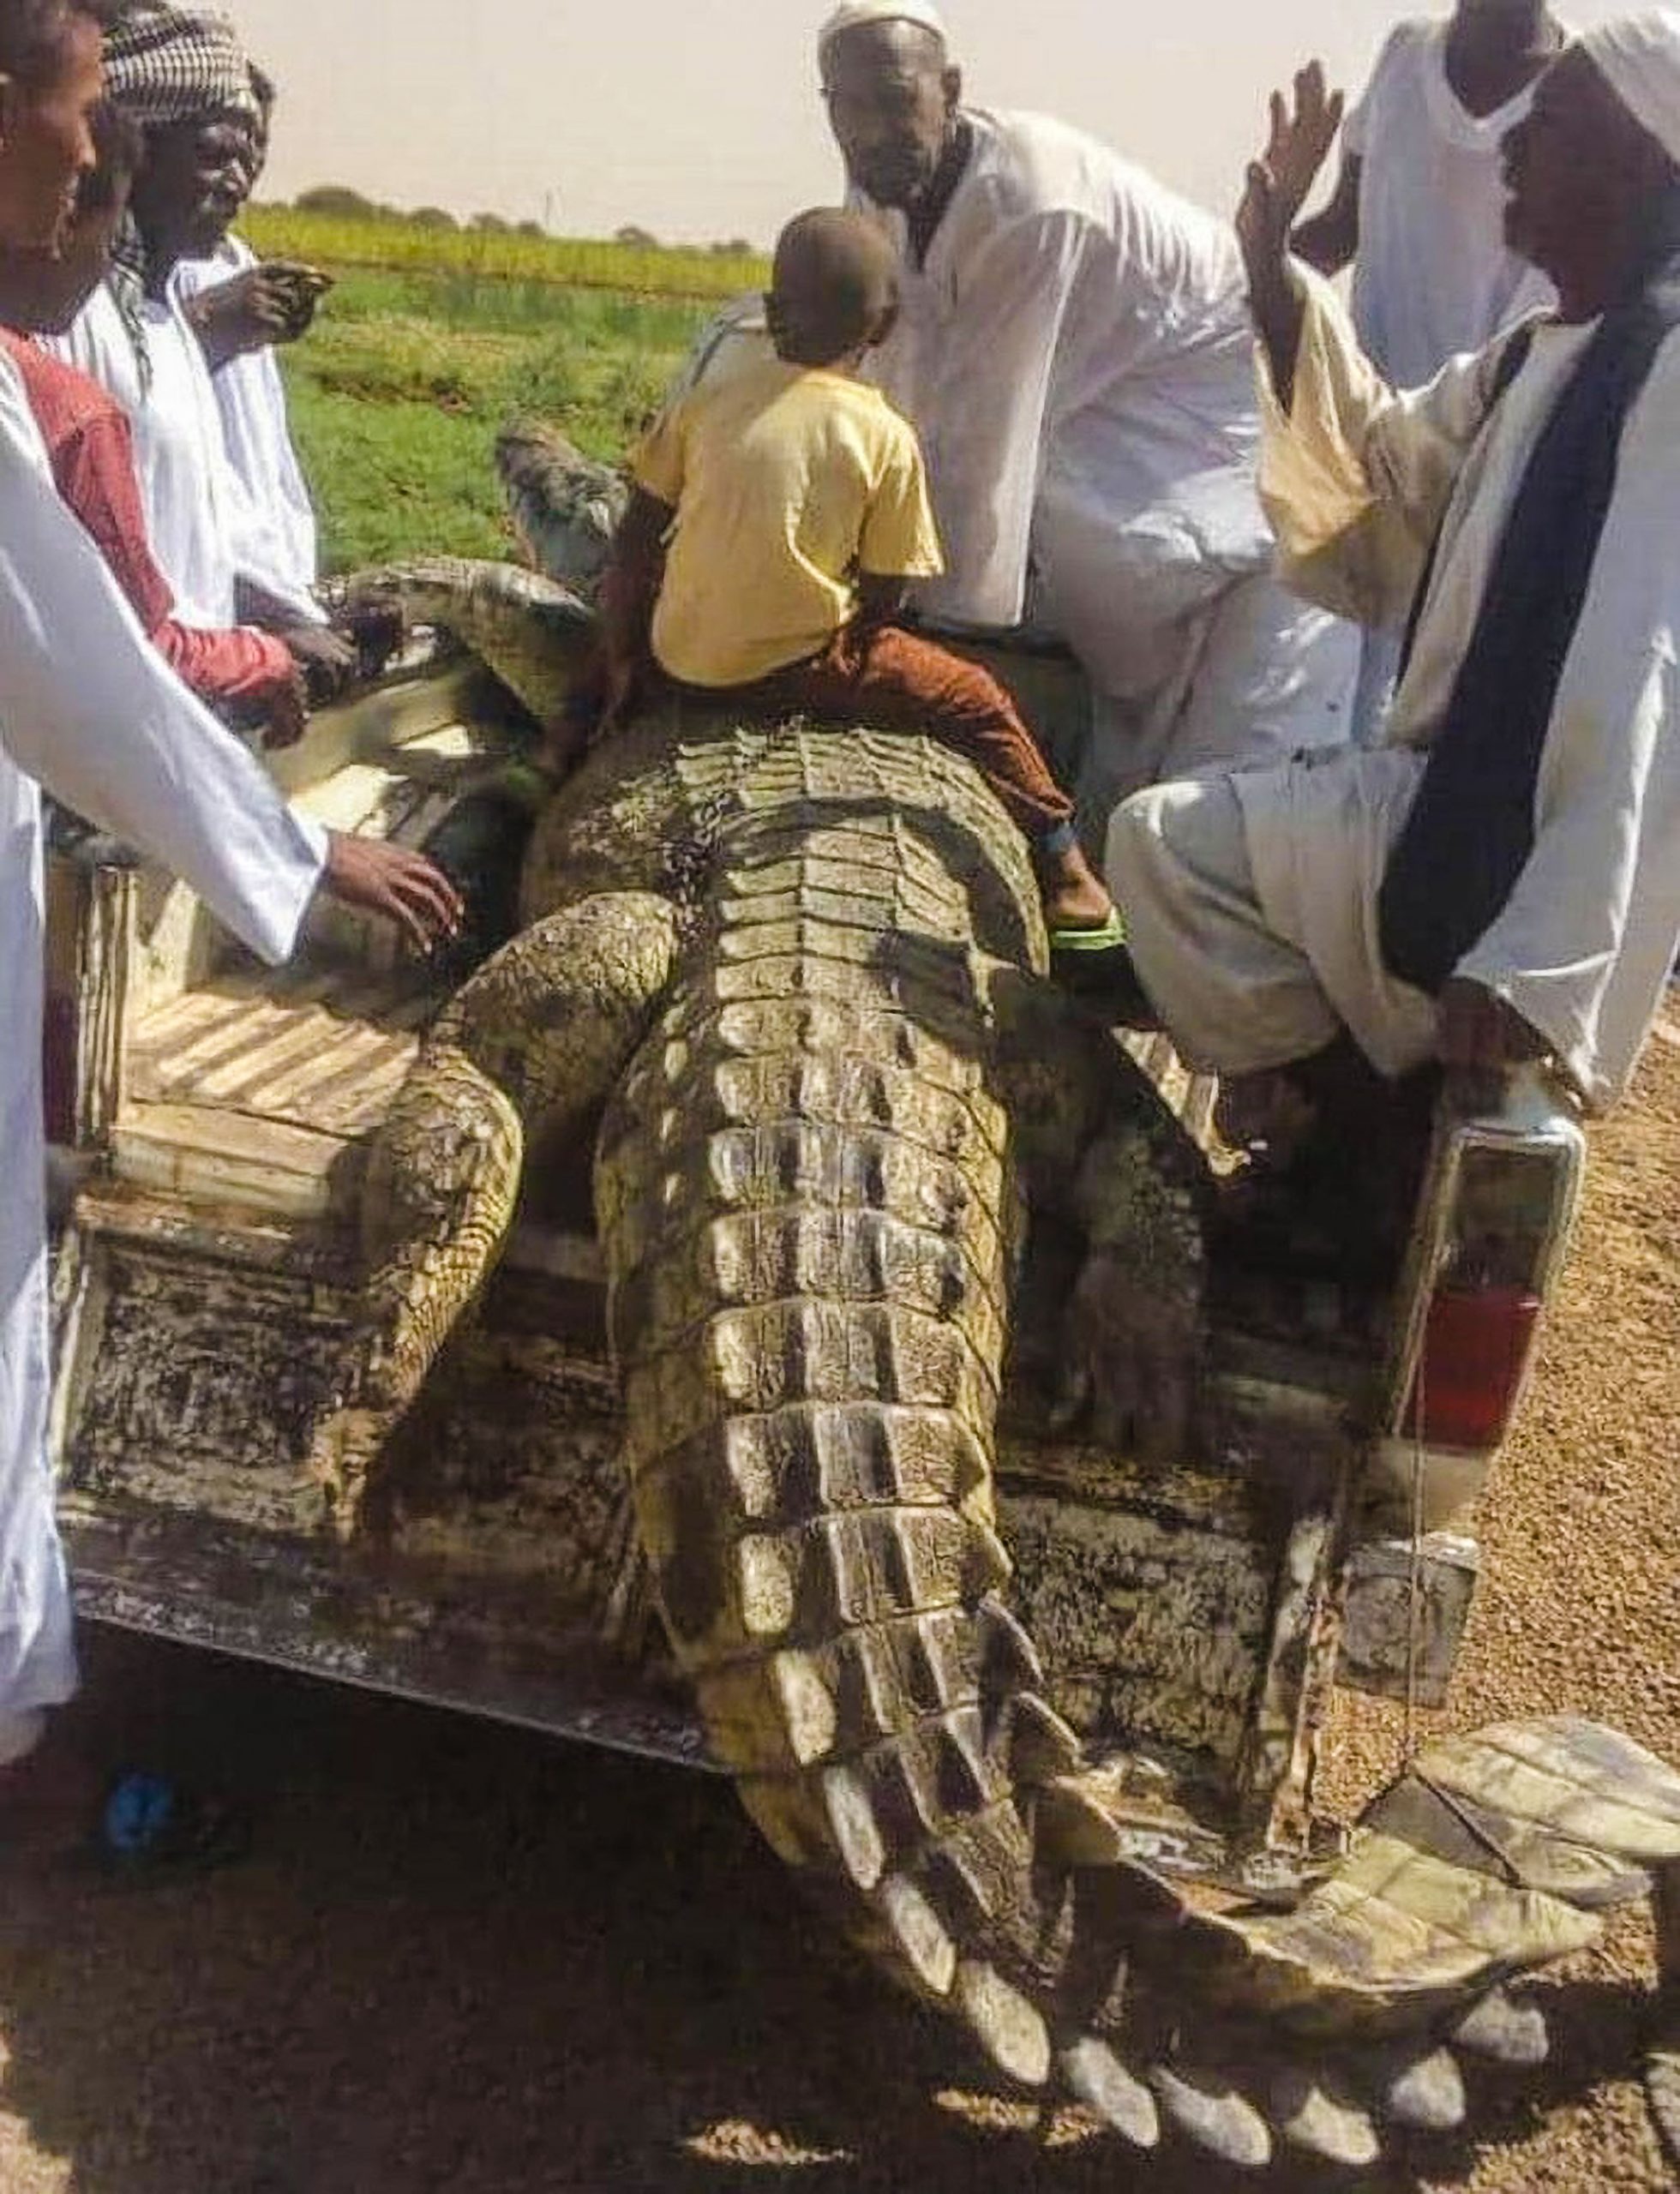 Read more about the article Brave Farmer Kills Giant Man-Eating Crocodile After 21-Day Hunt